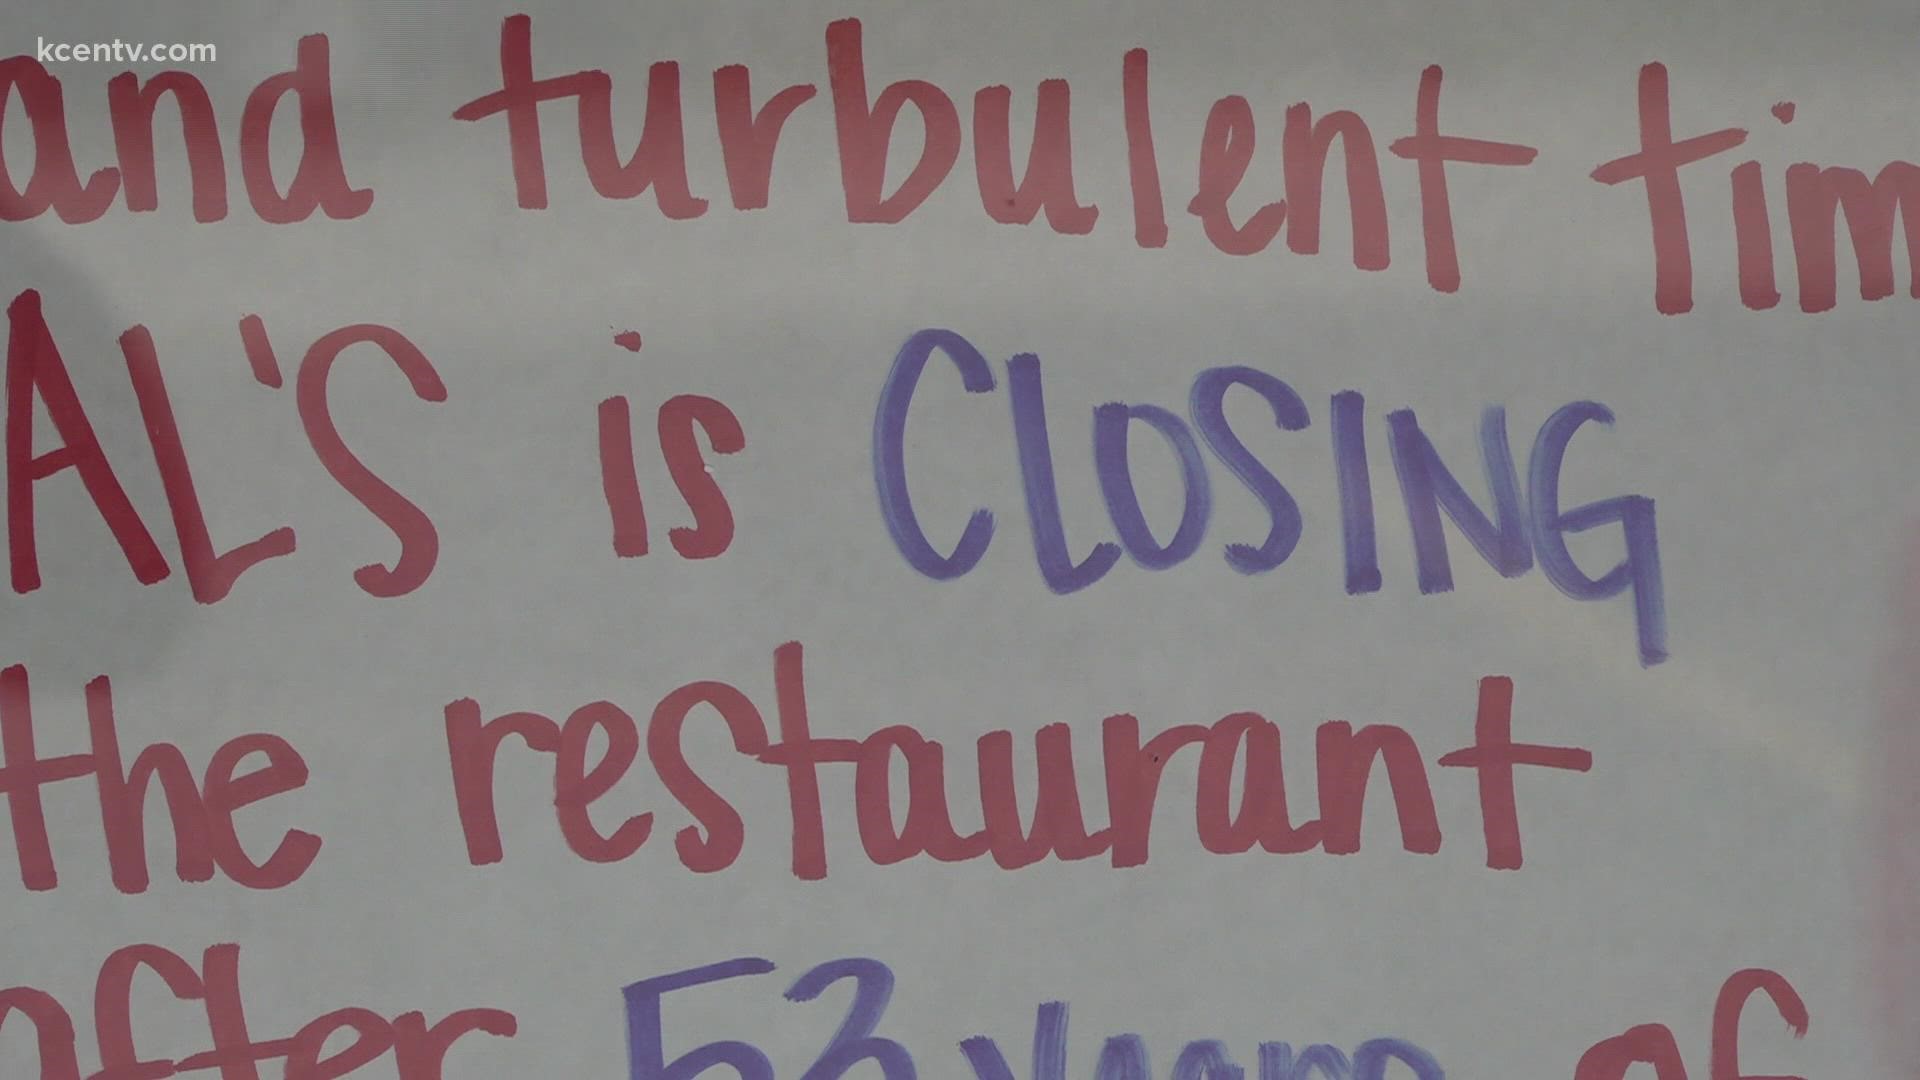 Al's BBQ Barn has been operating for 53 years. Due to inflation, owners say it is closing its doors.